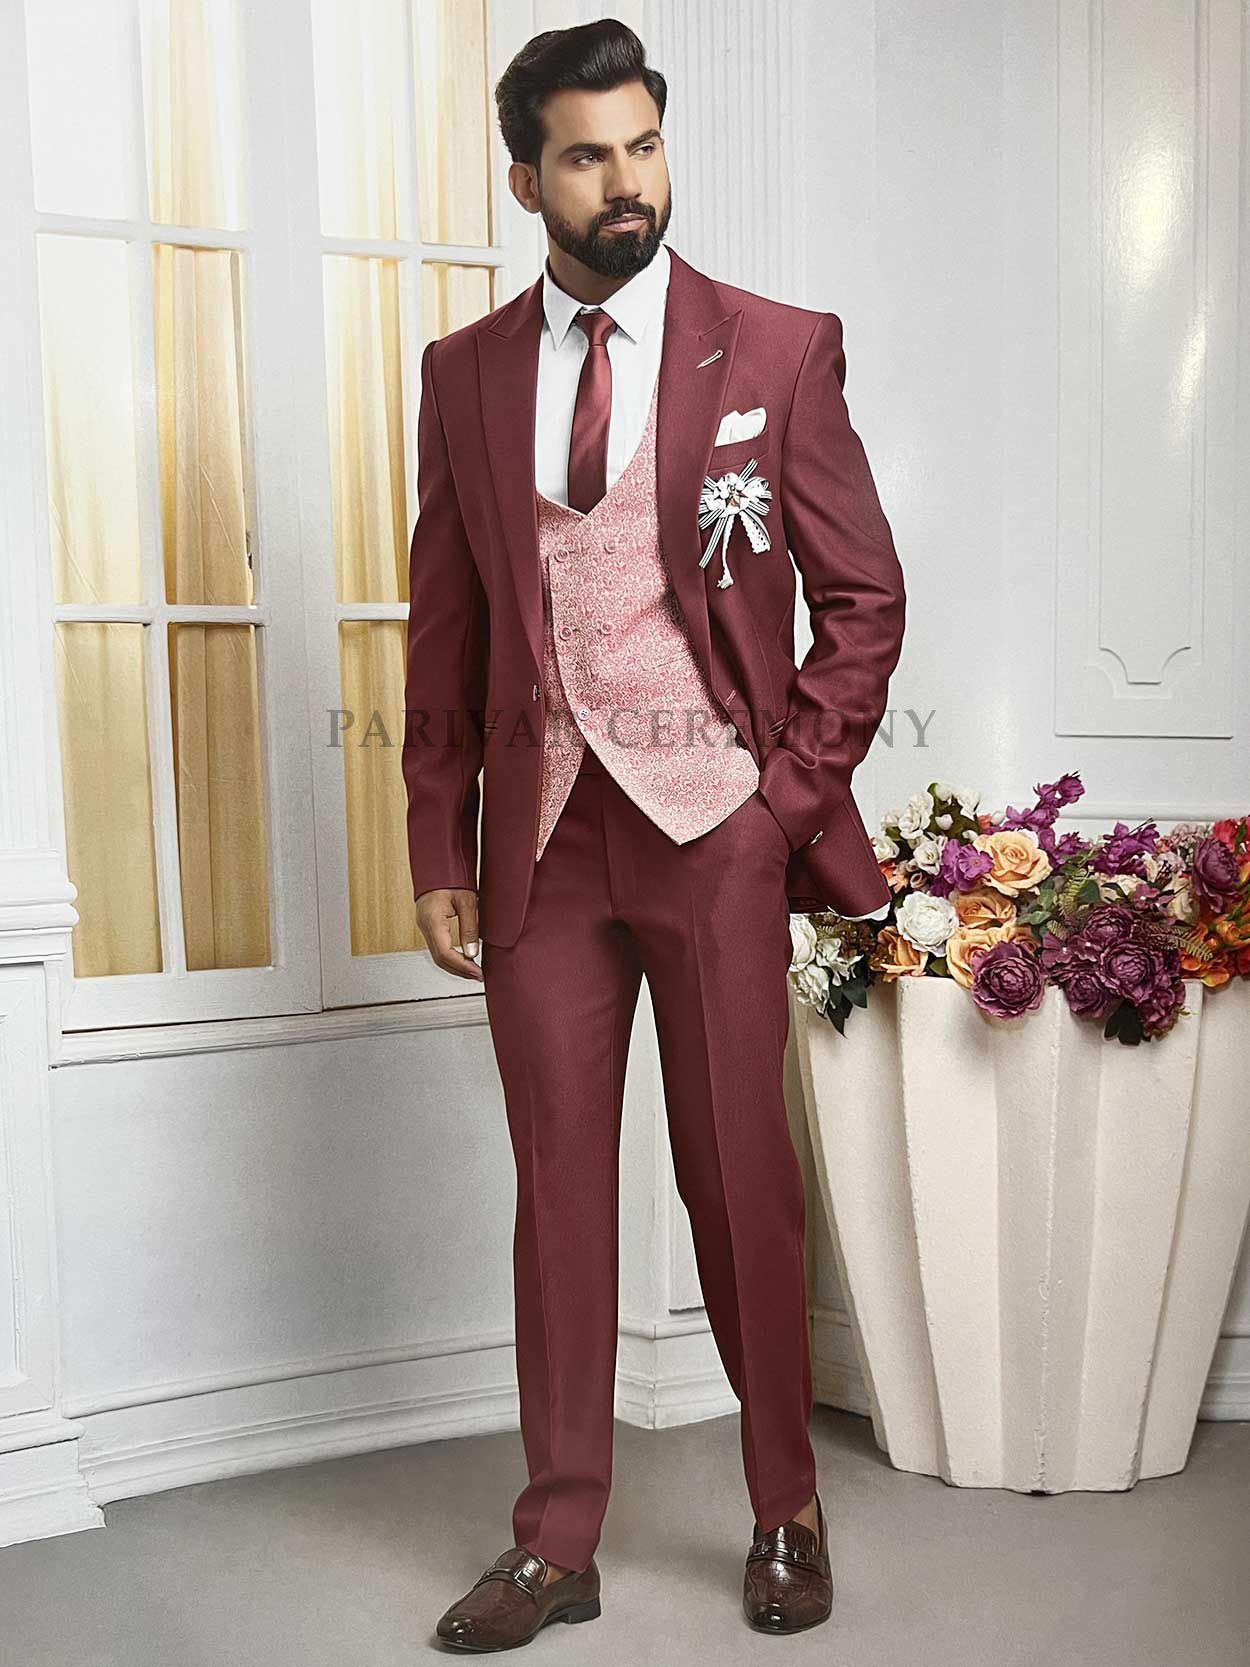 How To Pick the Perfect Suit for Your Wedding | The Modern Groom